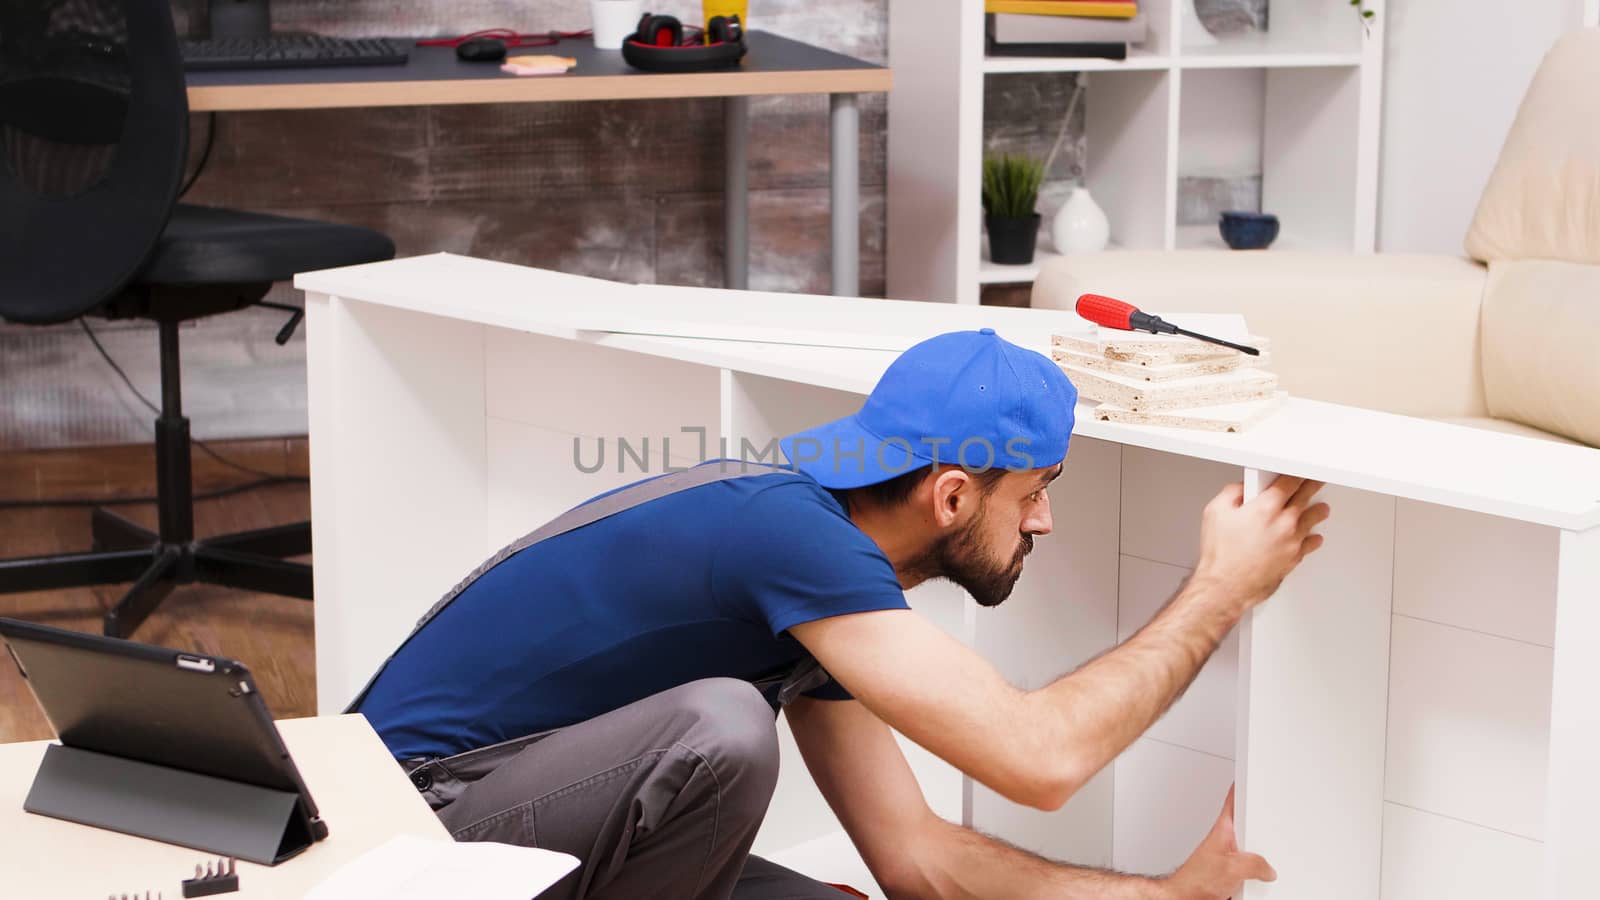 Attractive handyman assembles new furniture for home owners. Worker reading instructions from tablet computer.